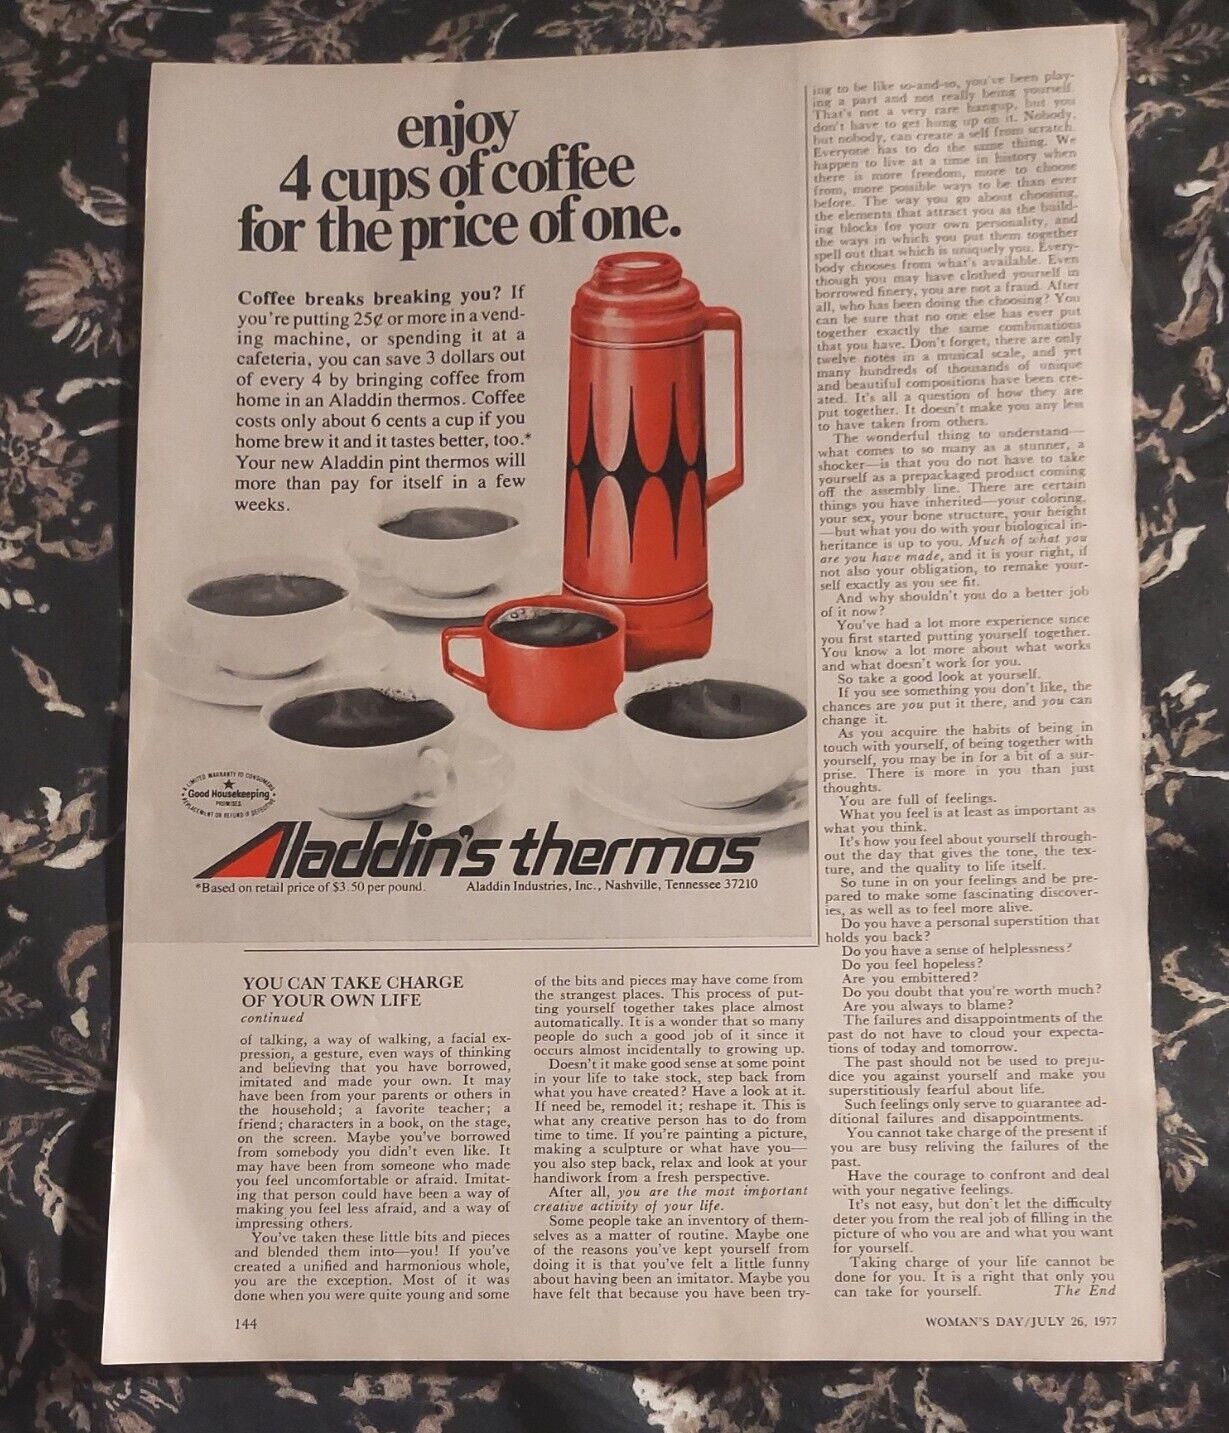 1977 print ad-Alladdin\'s Thermos-enjoy 4 cups of coffee for the price of one